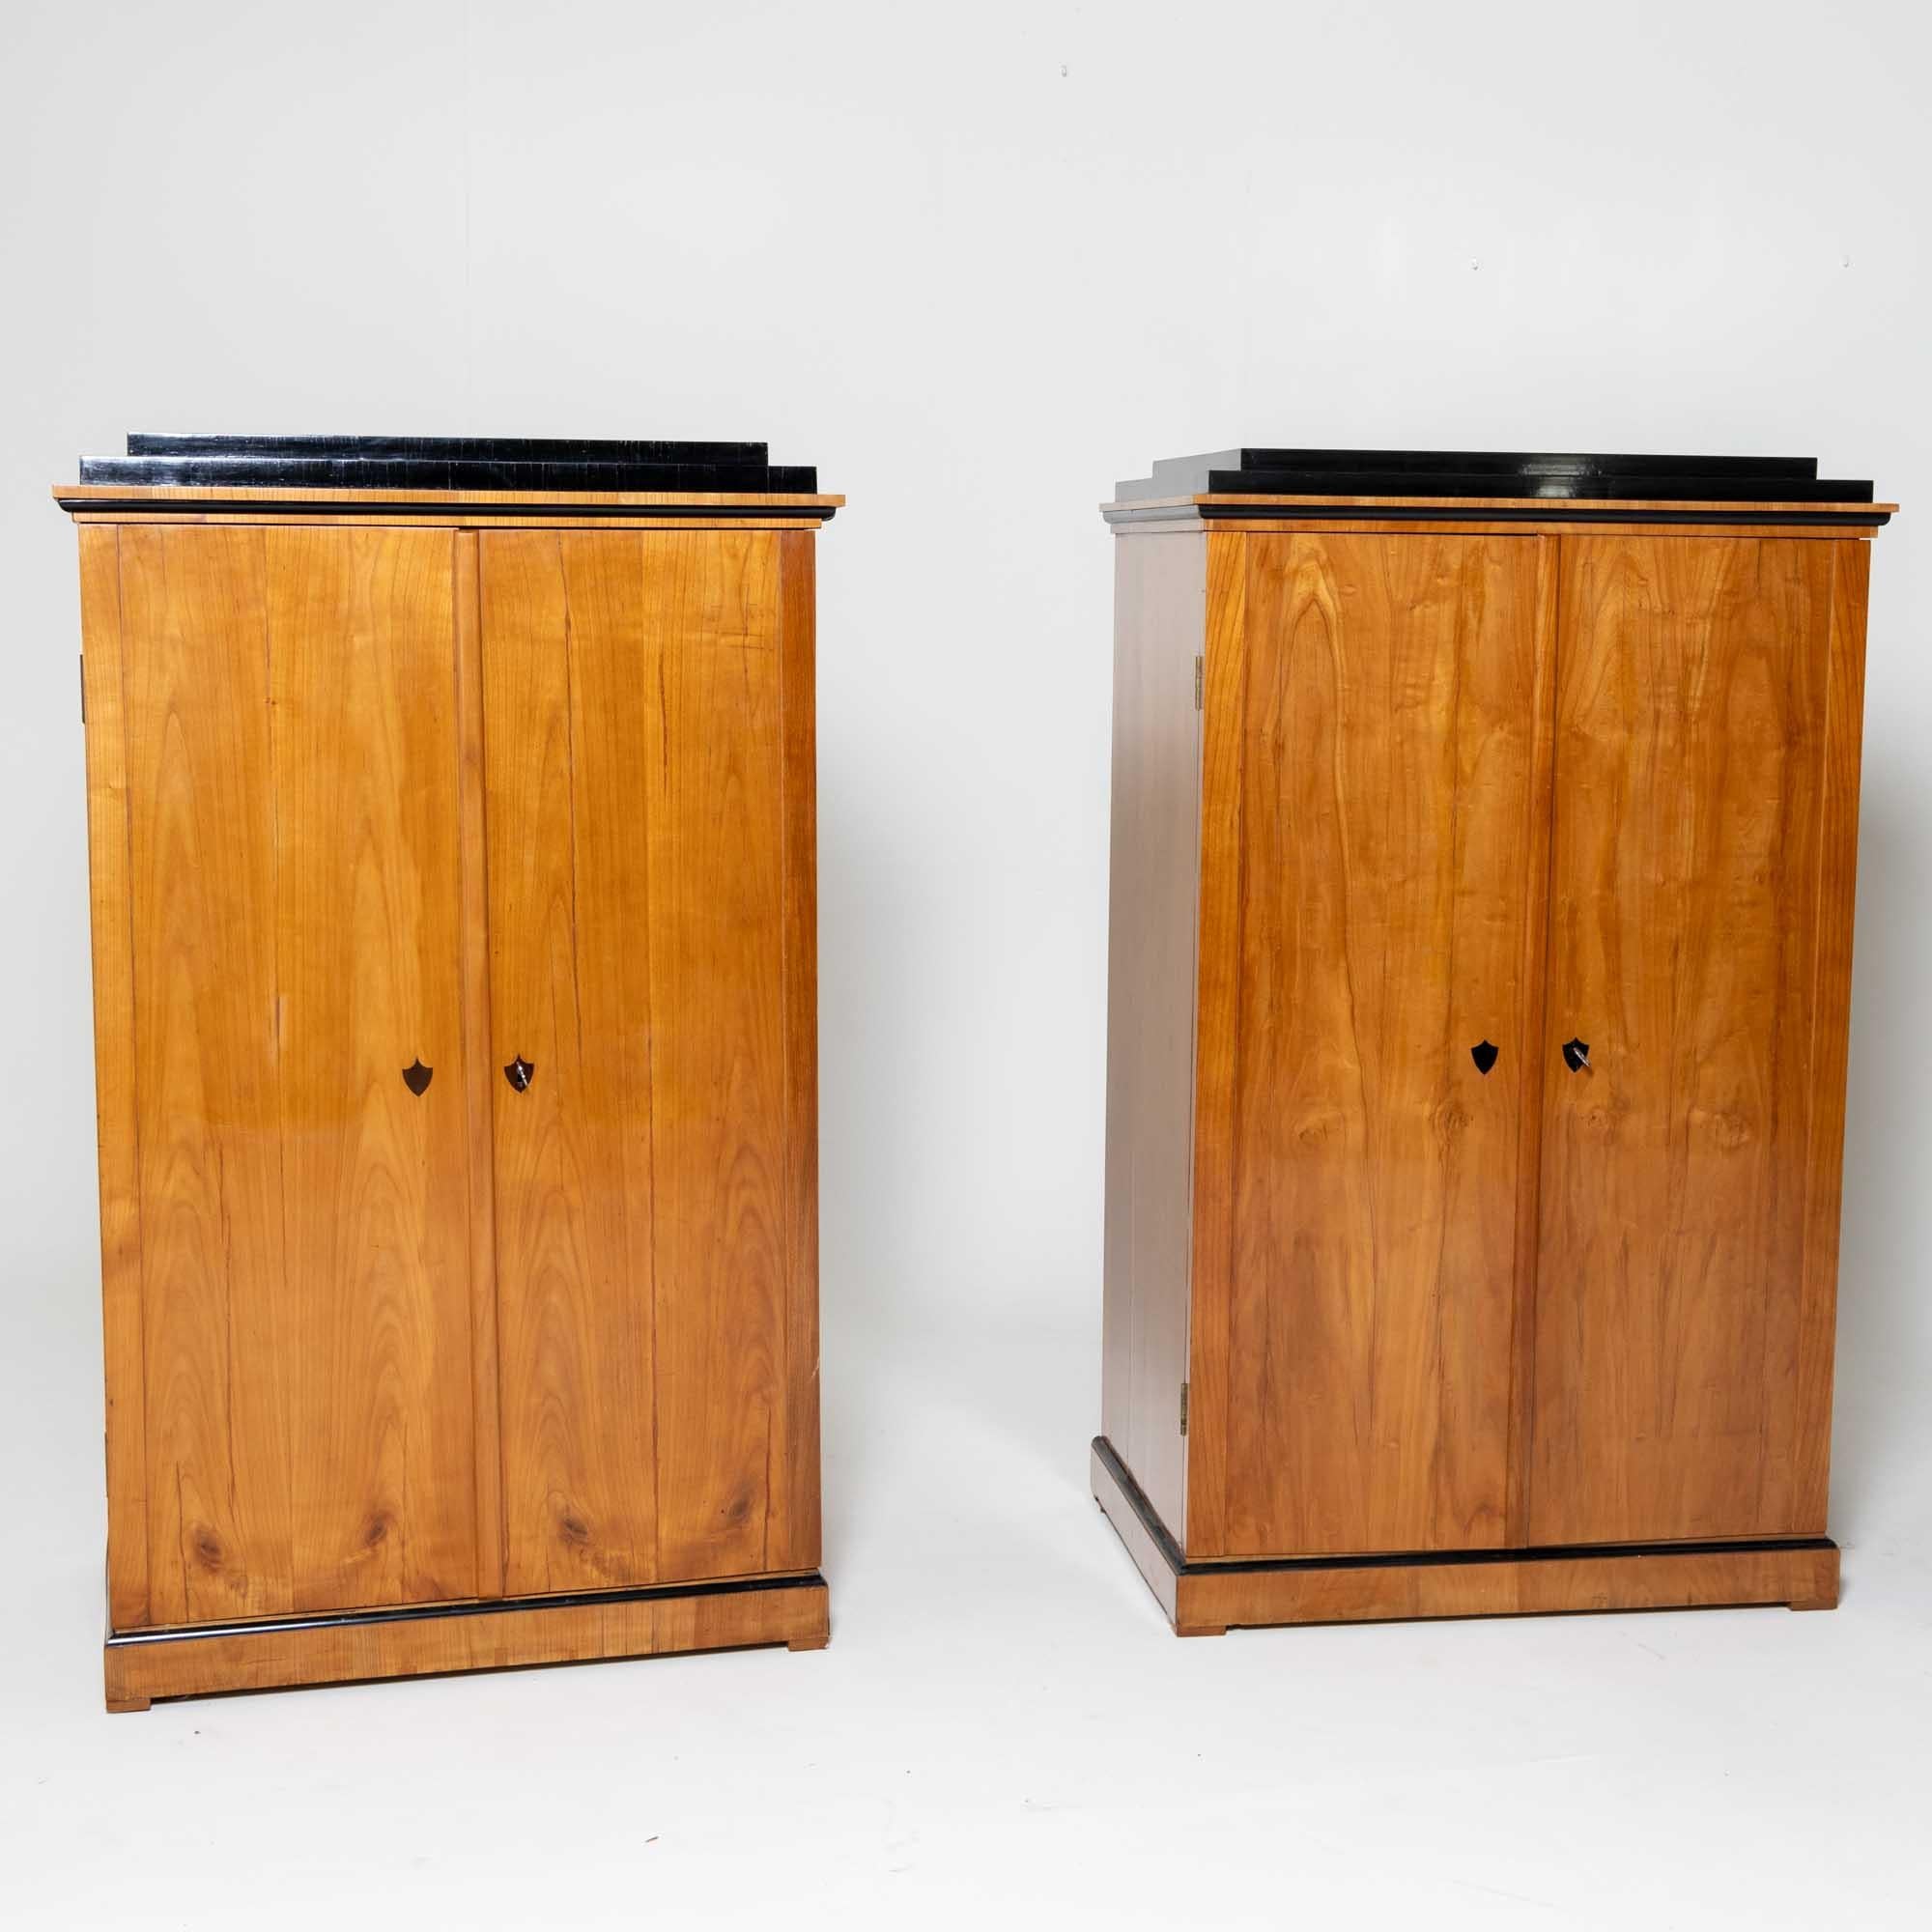 Cherry Pair of Biedermeier Collection Cabinets, Germany, probably Munich, c. 1820